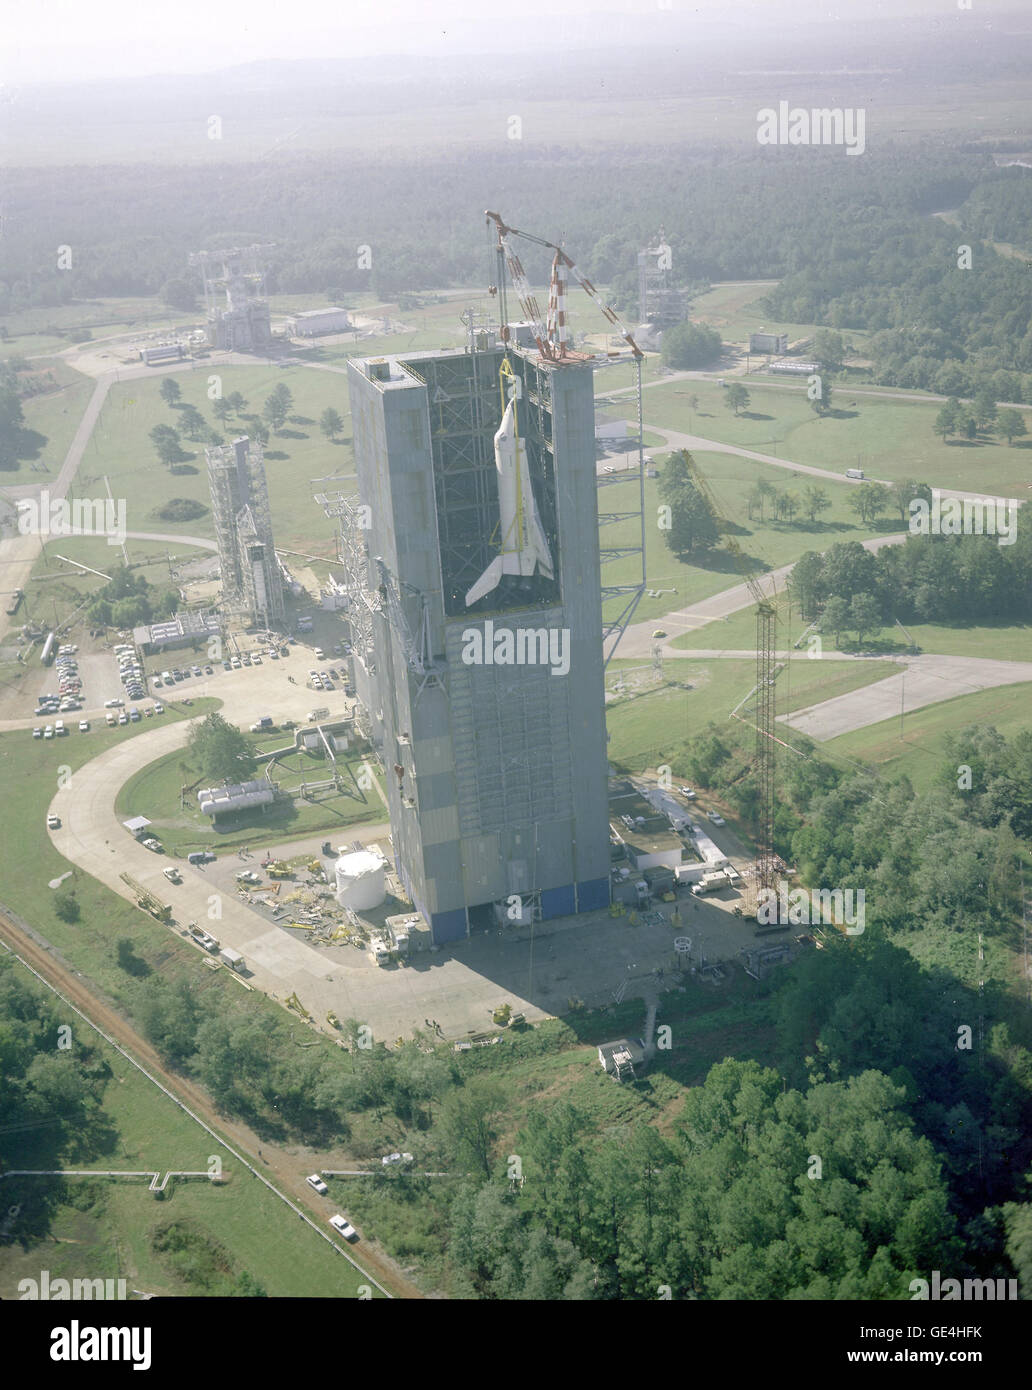 (October 4, 1978) Aerial view of Shuttle Orbiter Enterprise being hoisted into Marshall's Dynamic Test Stand for the Mated Vertical Ground Vibration test (MVGVT). The test marked the first time ever that the entire Space Shuttle elements, an Orbiter, an External Tank (ET), and two Solid Rocket Boosters (SRB), were mated together. Purpose of the vibration tests was to verify that the Space Shuttle performed its launch configuration as predicted.   Image # : 7992403 Stock Photo